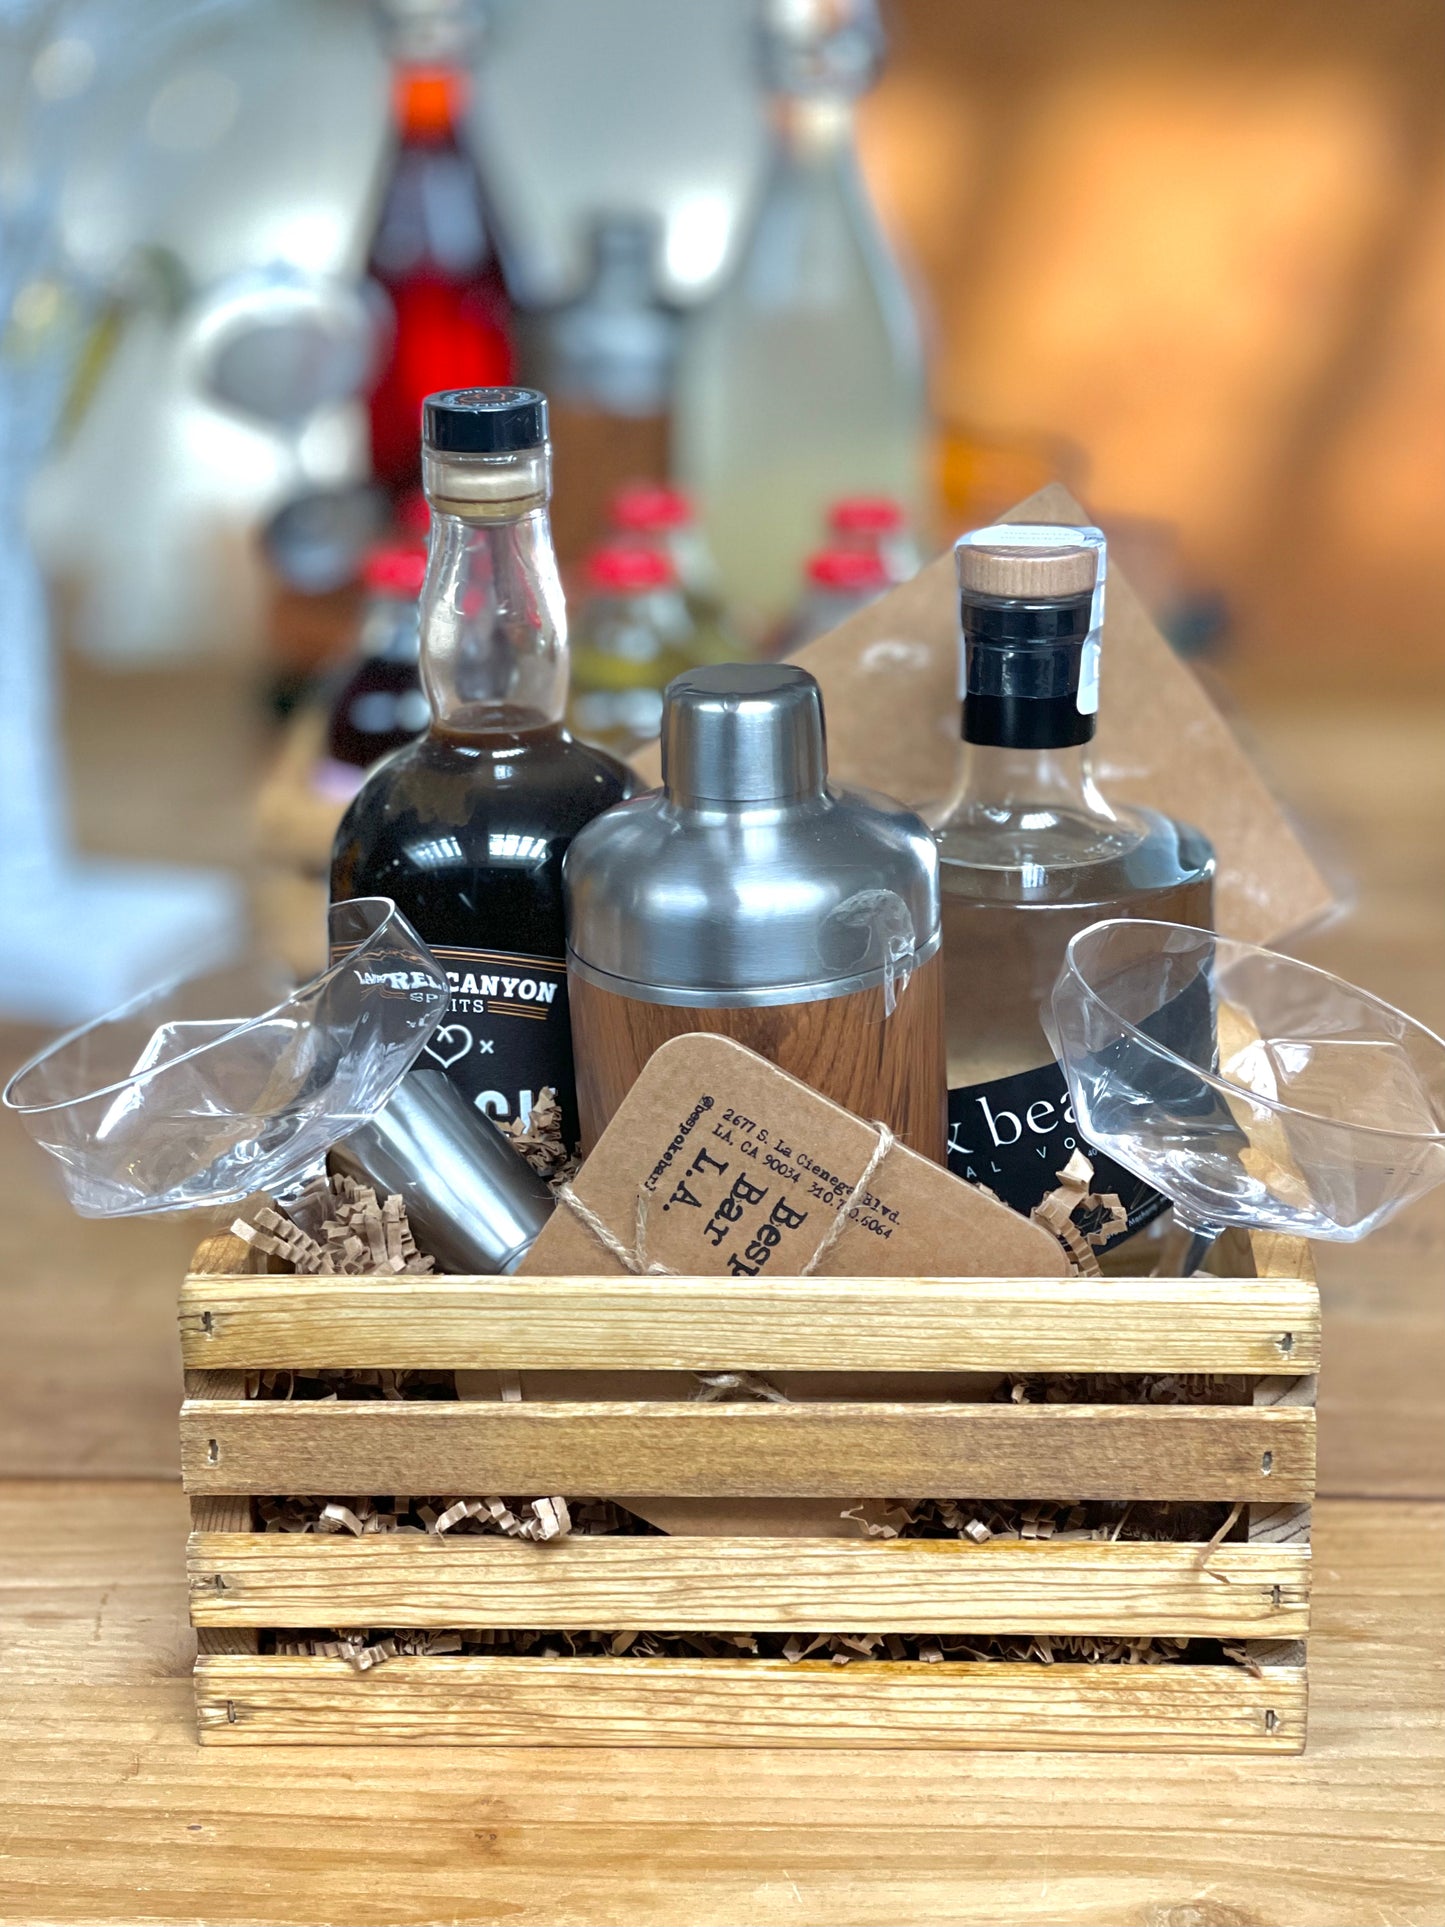 The Espresso Martini Box with Coupes and Swell Shaker